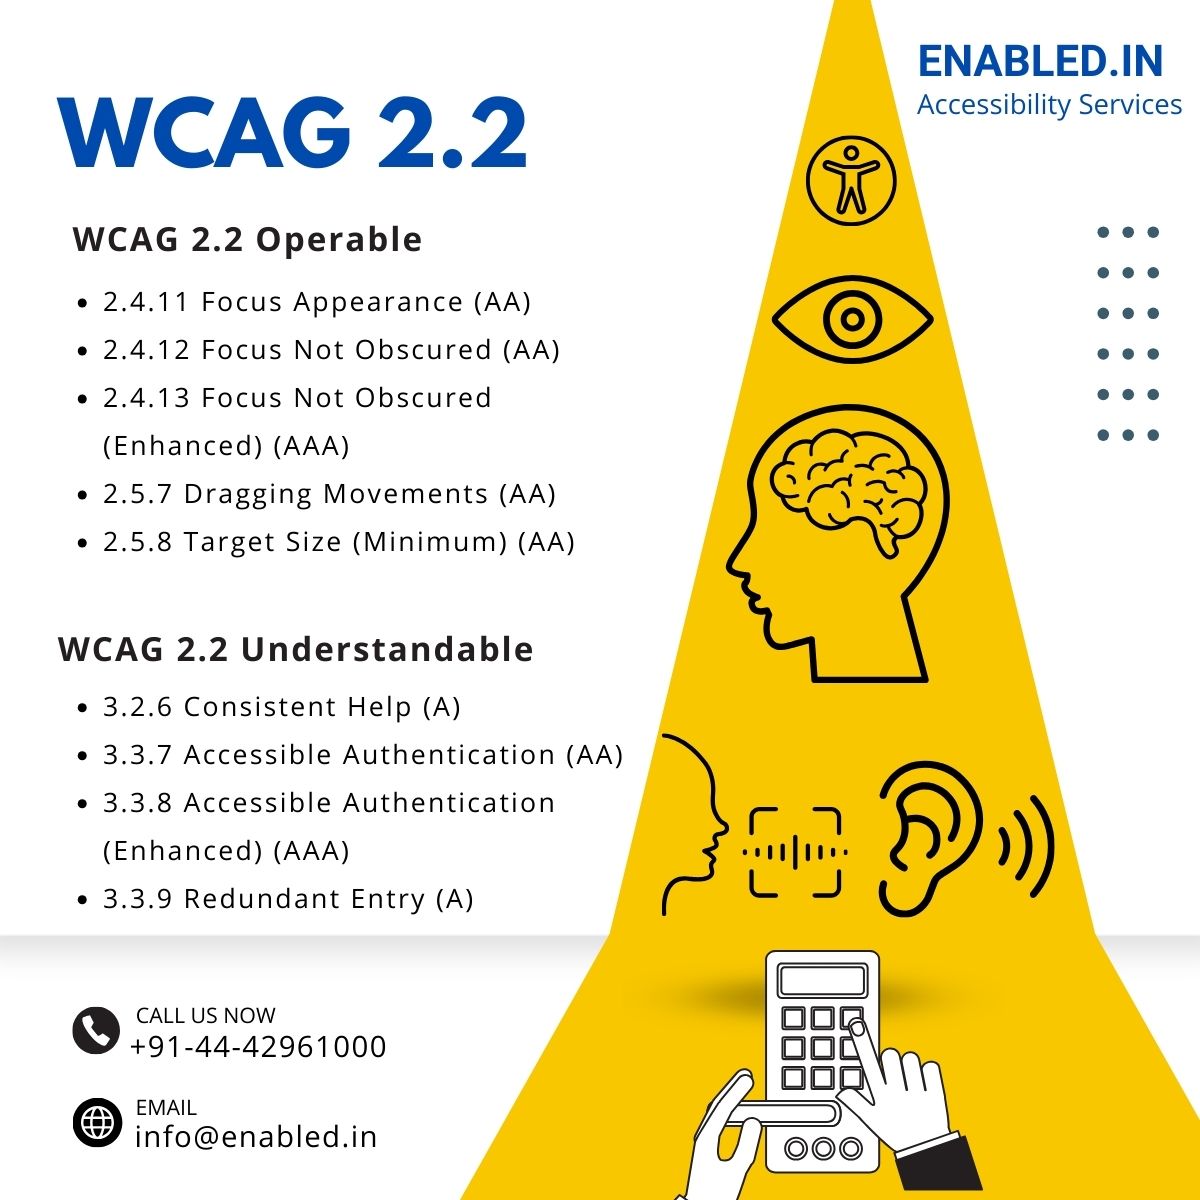 WCAG 2.2 New Accessibility Guidelines